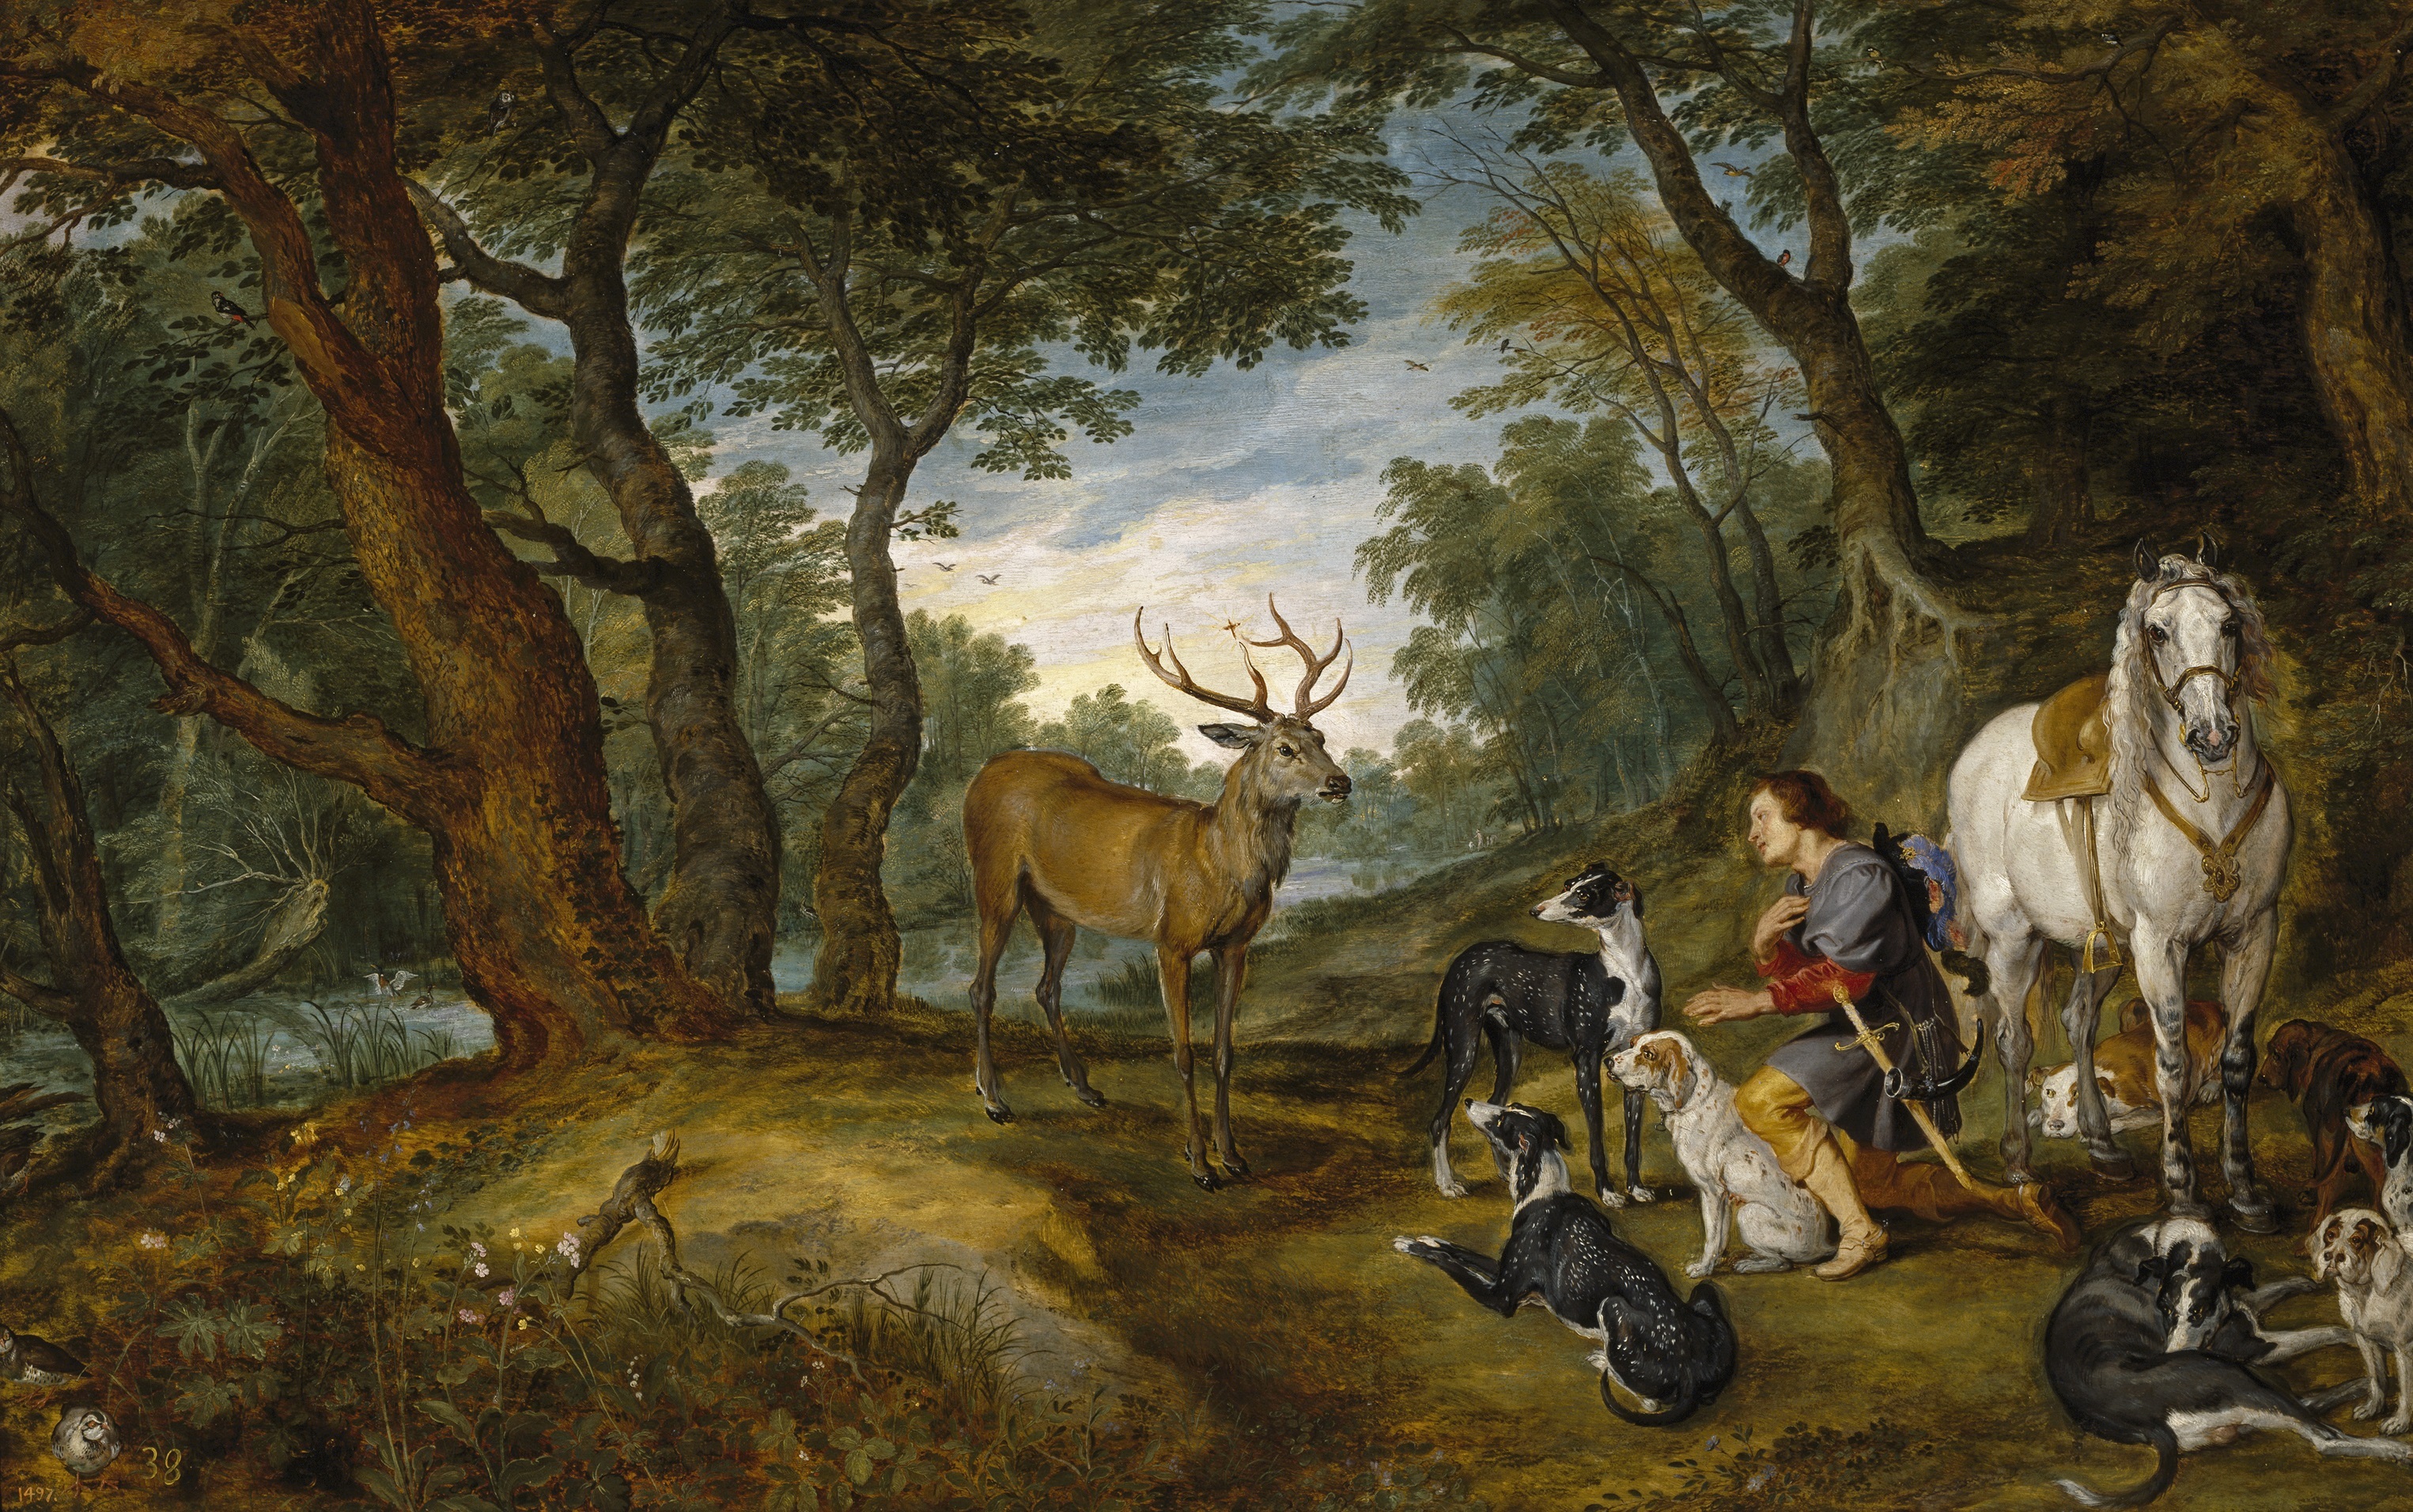 General 3051x1912 Peter Paul Rubens Jan Bruegel Oil on canvas oil painting painting artwork nature forest animals deer dog men sword horse sky flowers leather boots